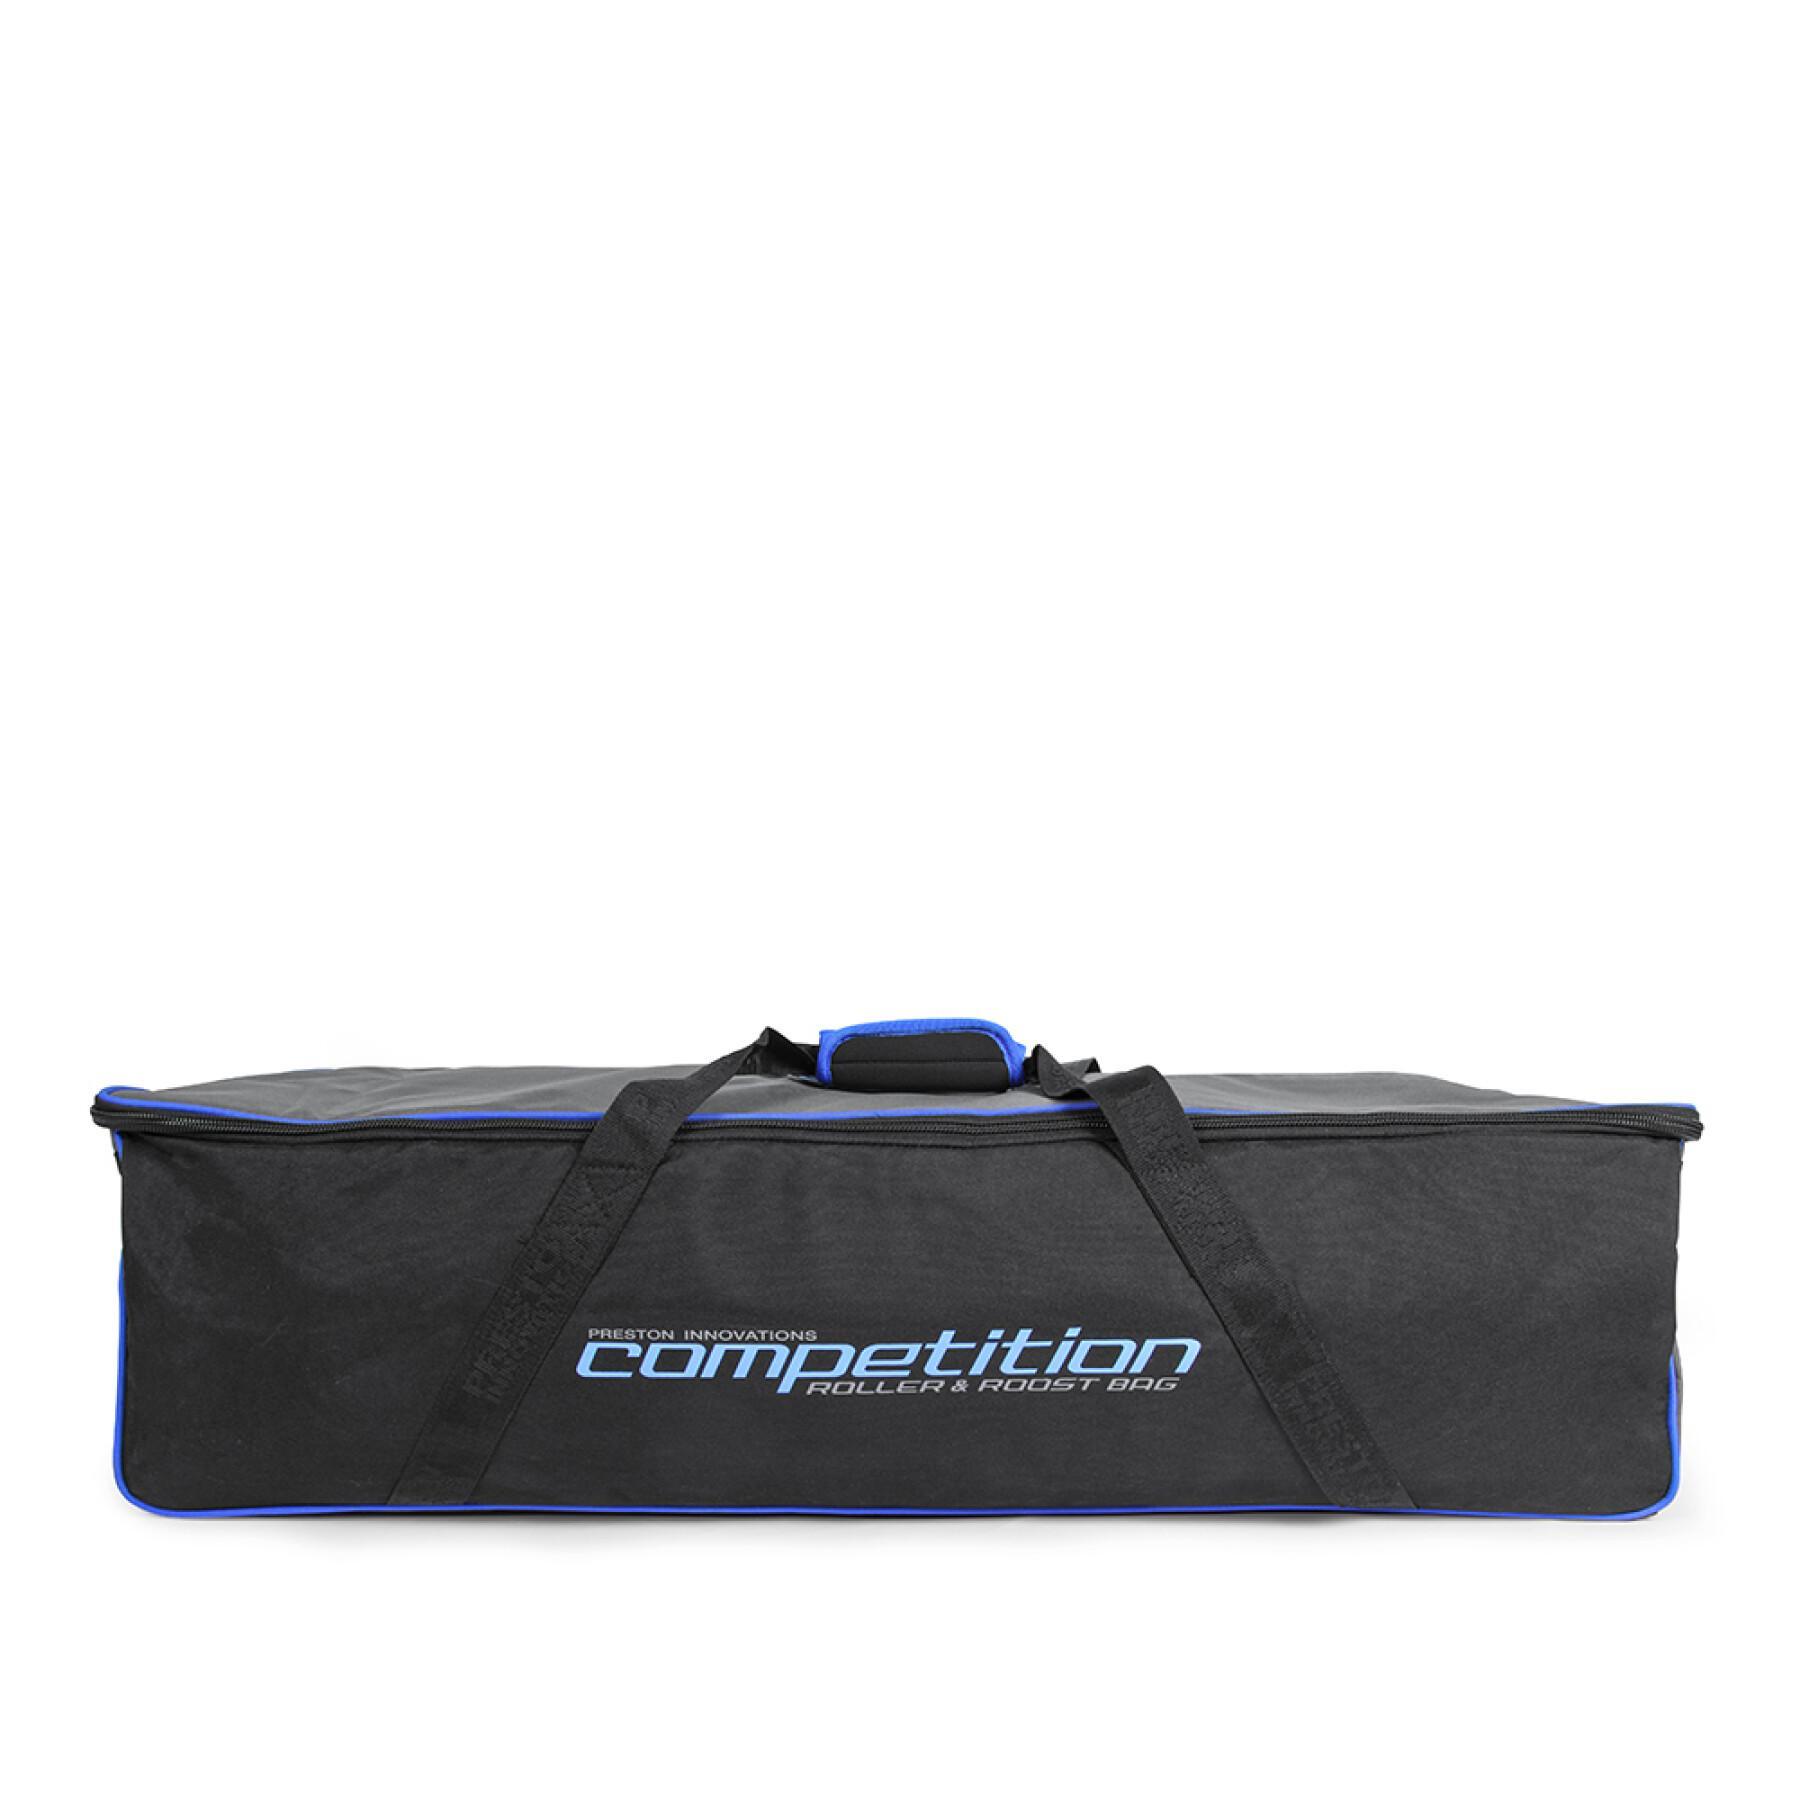 Fishing bag Preston competition roller & roost